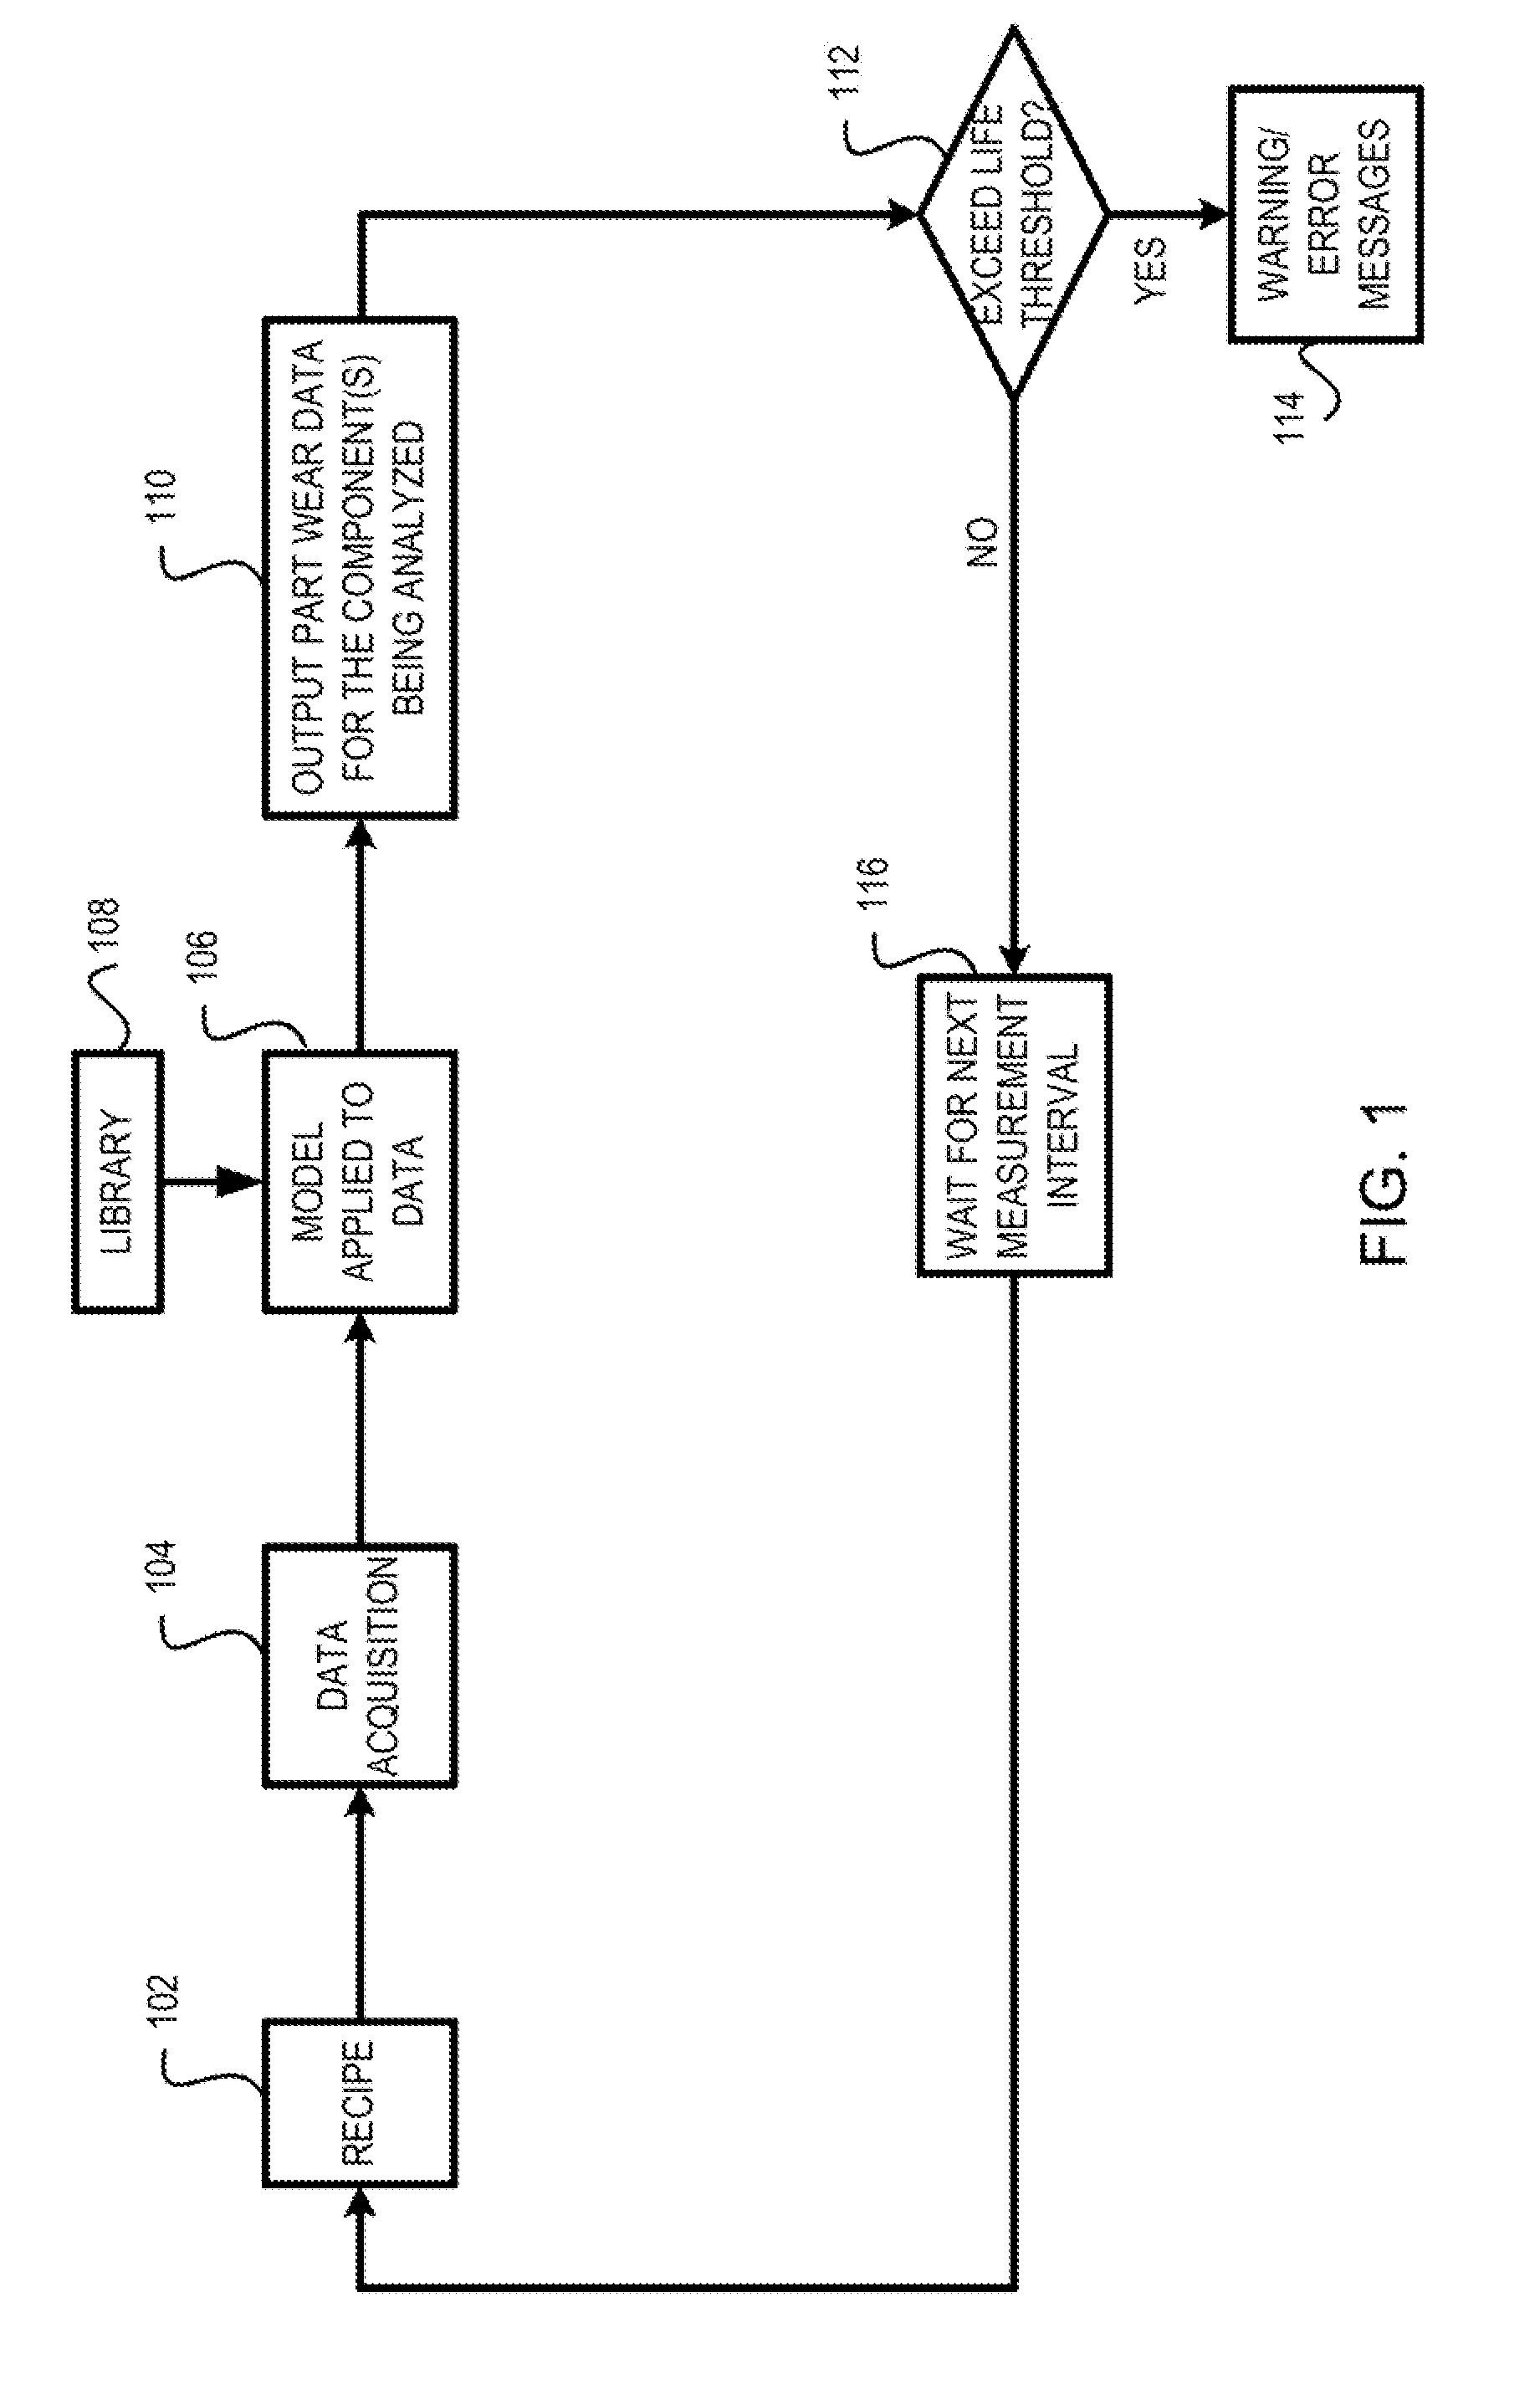 Methods and apparatus for predictive preventive maintenance of processing chambers